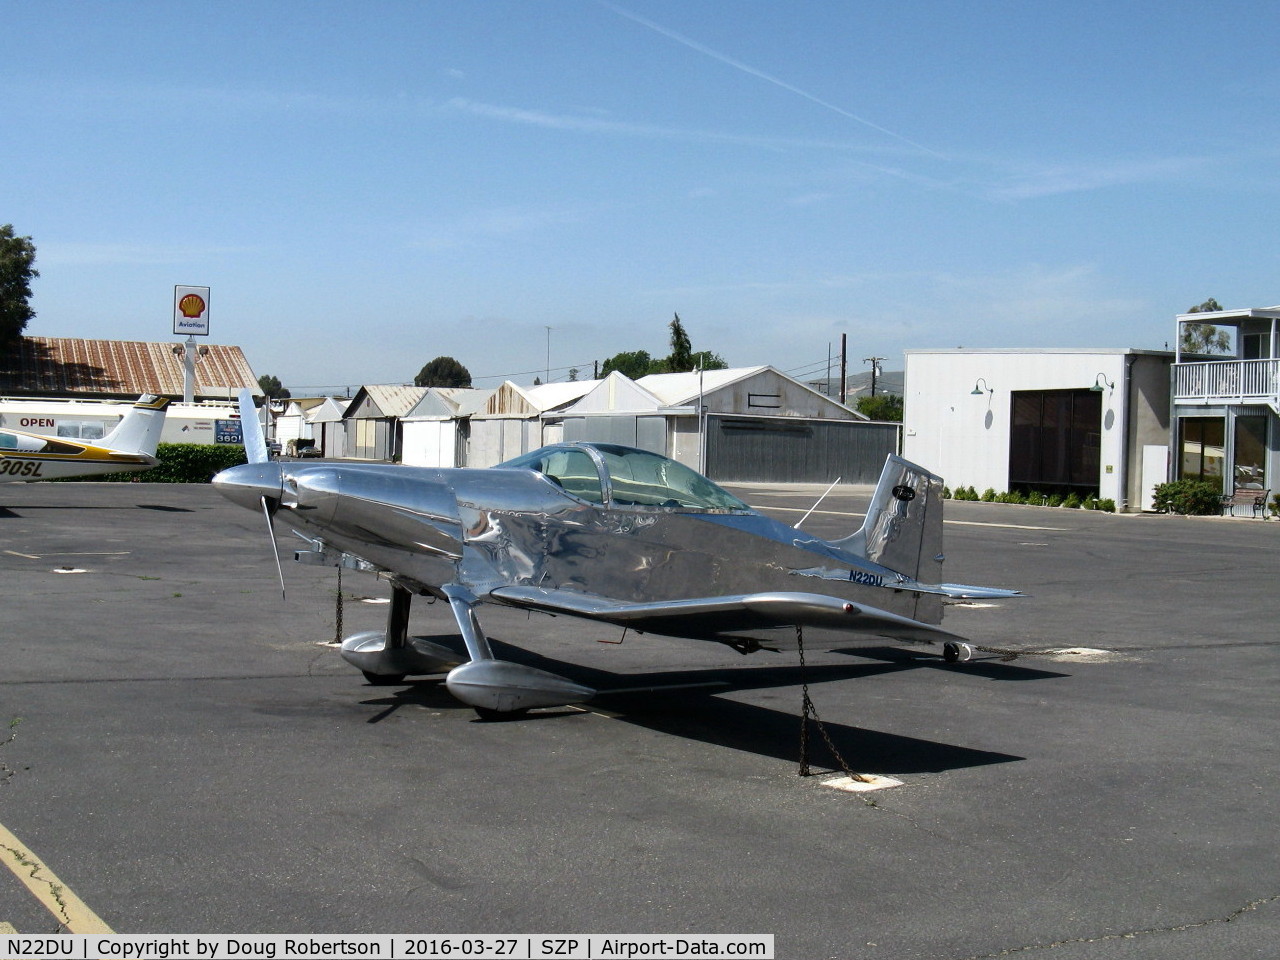 N22DU, 1977 Thorp T-18 Tiger C/N 22, 1977 Thorp T-18 TIGER, Lycoming O-290, John Thorp's 18th design, highly polished, excellent workmanship. Also available as S-18 single place plans built